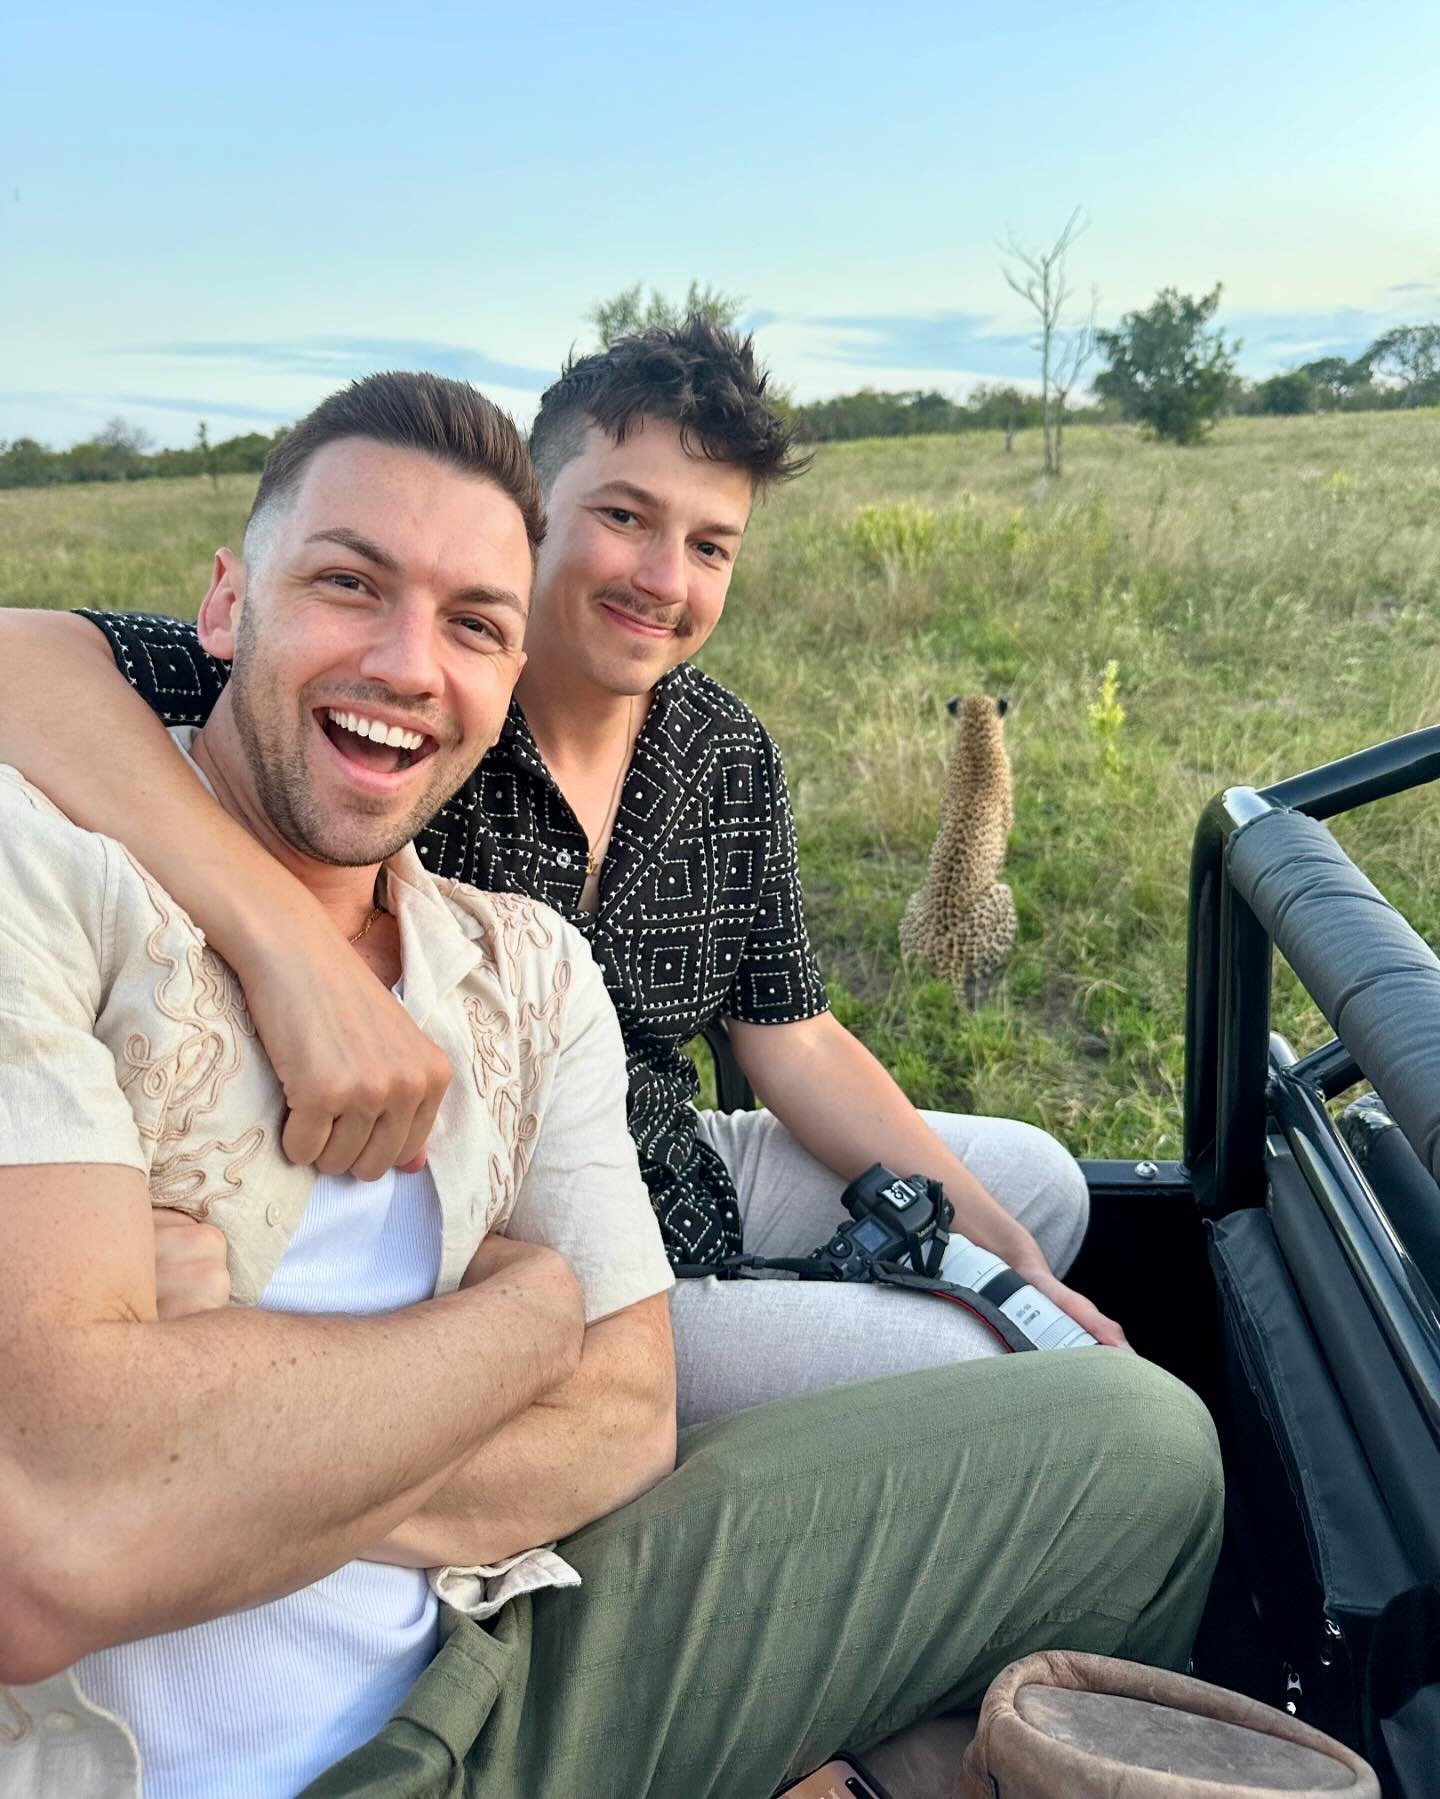 This has already been overwhelming&mdash;and we still have a few more days to go! It&rsquo;s our first time in South Africa 🇿🇦 together, and just the first 24 hours at @silvan_safari with @rhinoafrica has put into focus WHY travel is so important&h